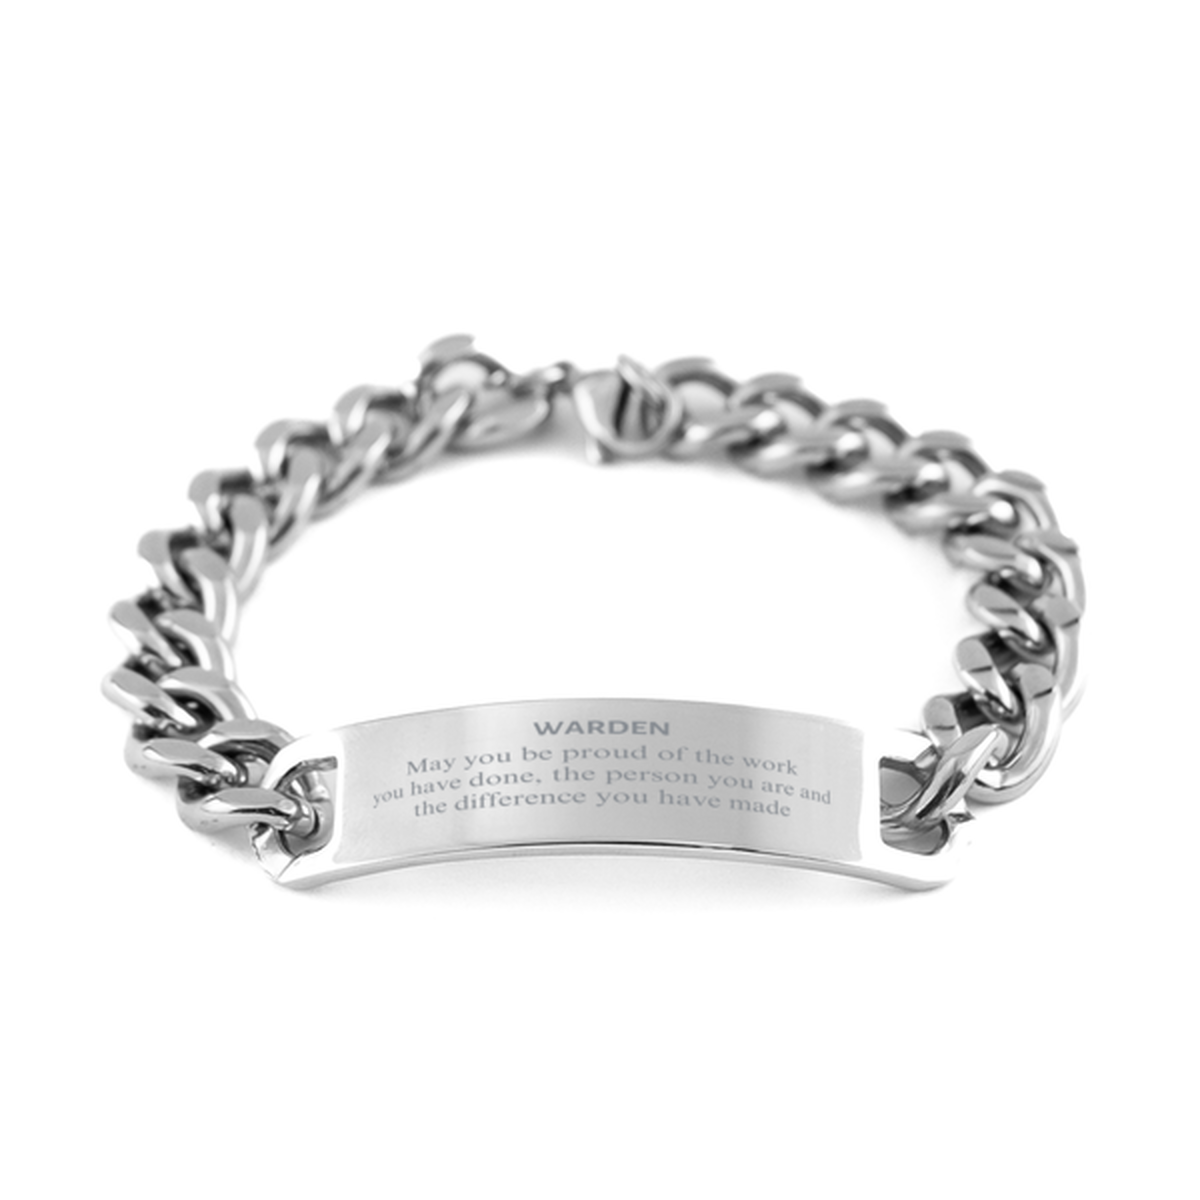 Warden May you be proud of the work you have done, Retirement Warden Cuban Chain Stainless Steel Bracelet for Colleague Appreciation Gifts Amazing for Warden